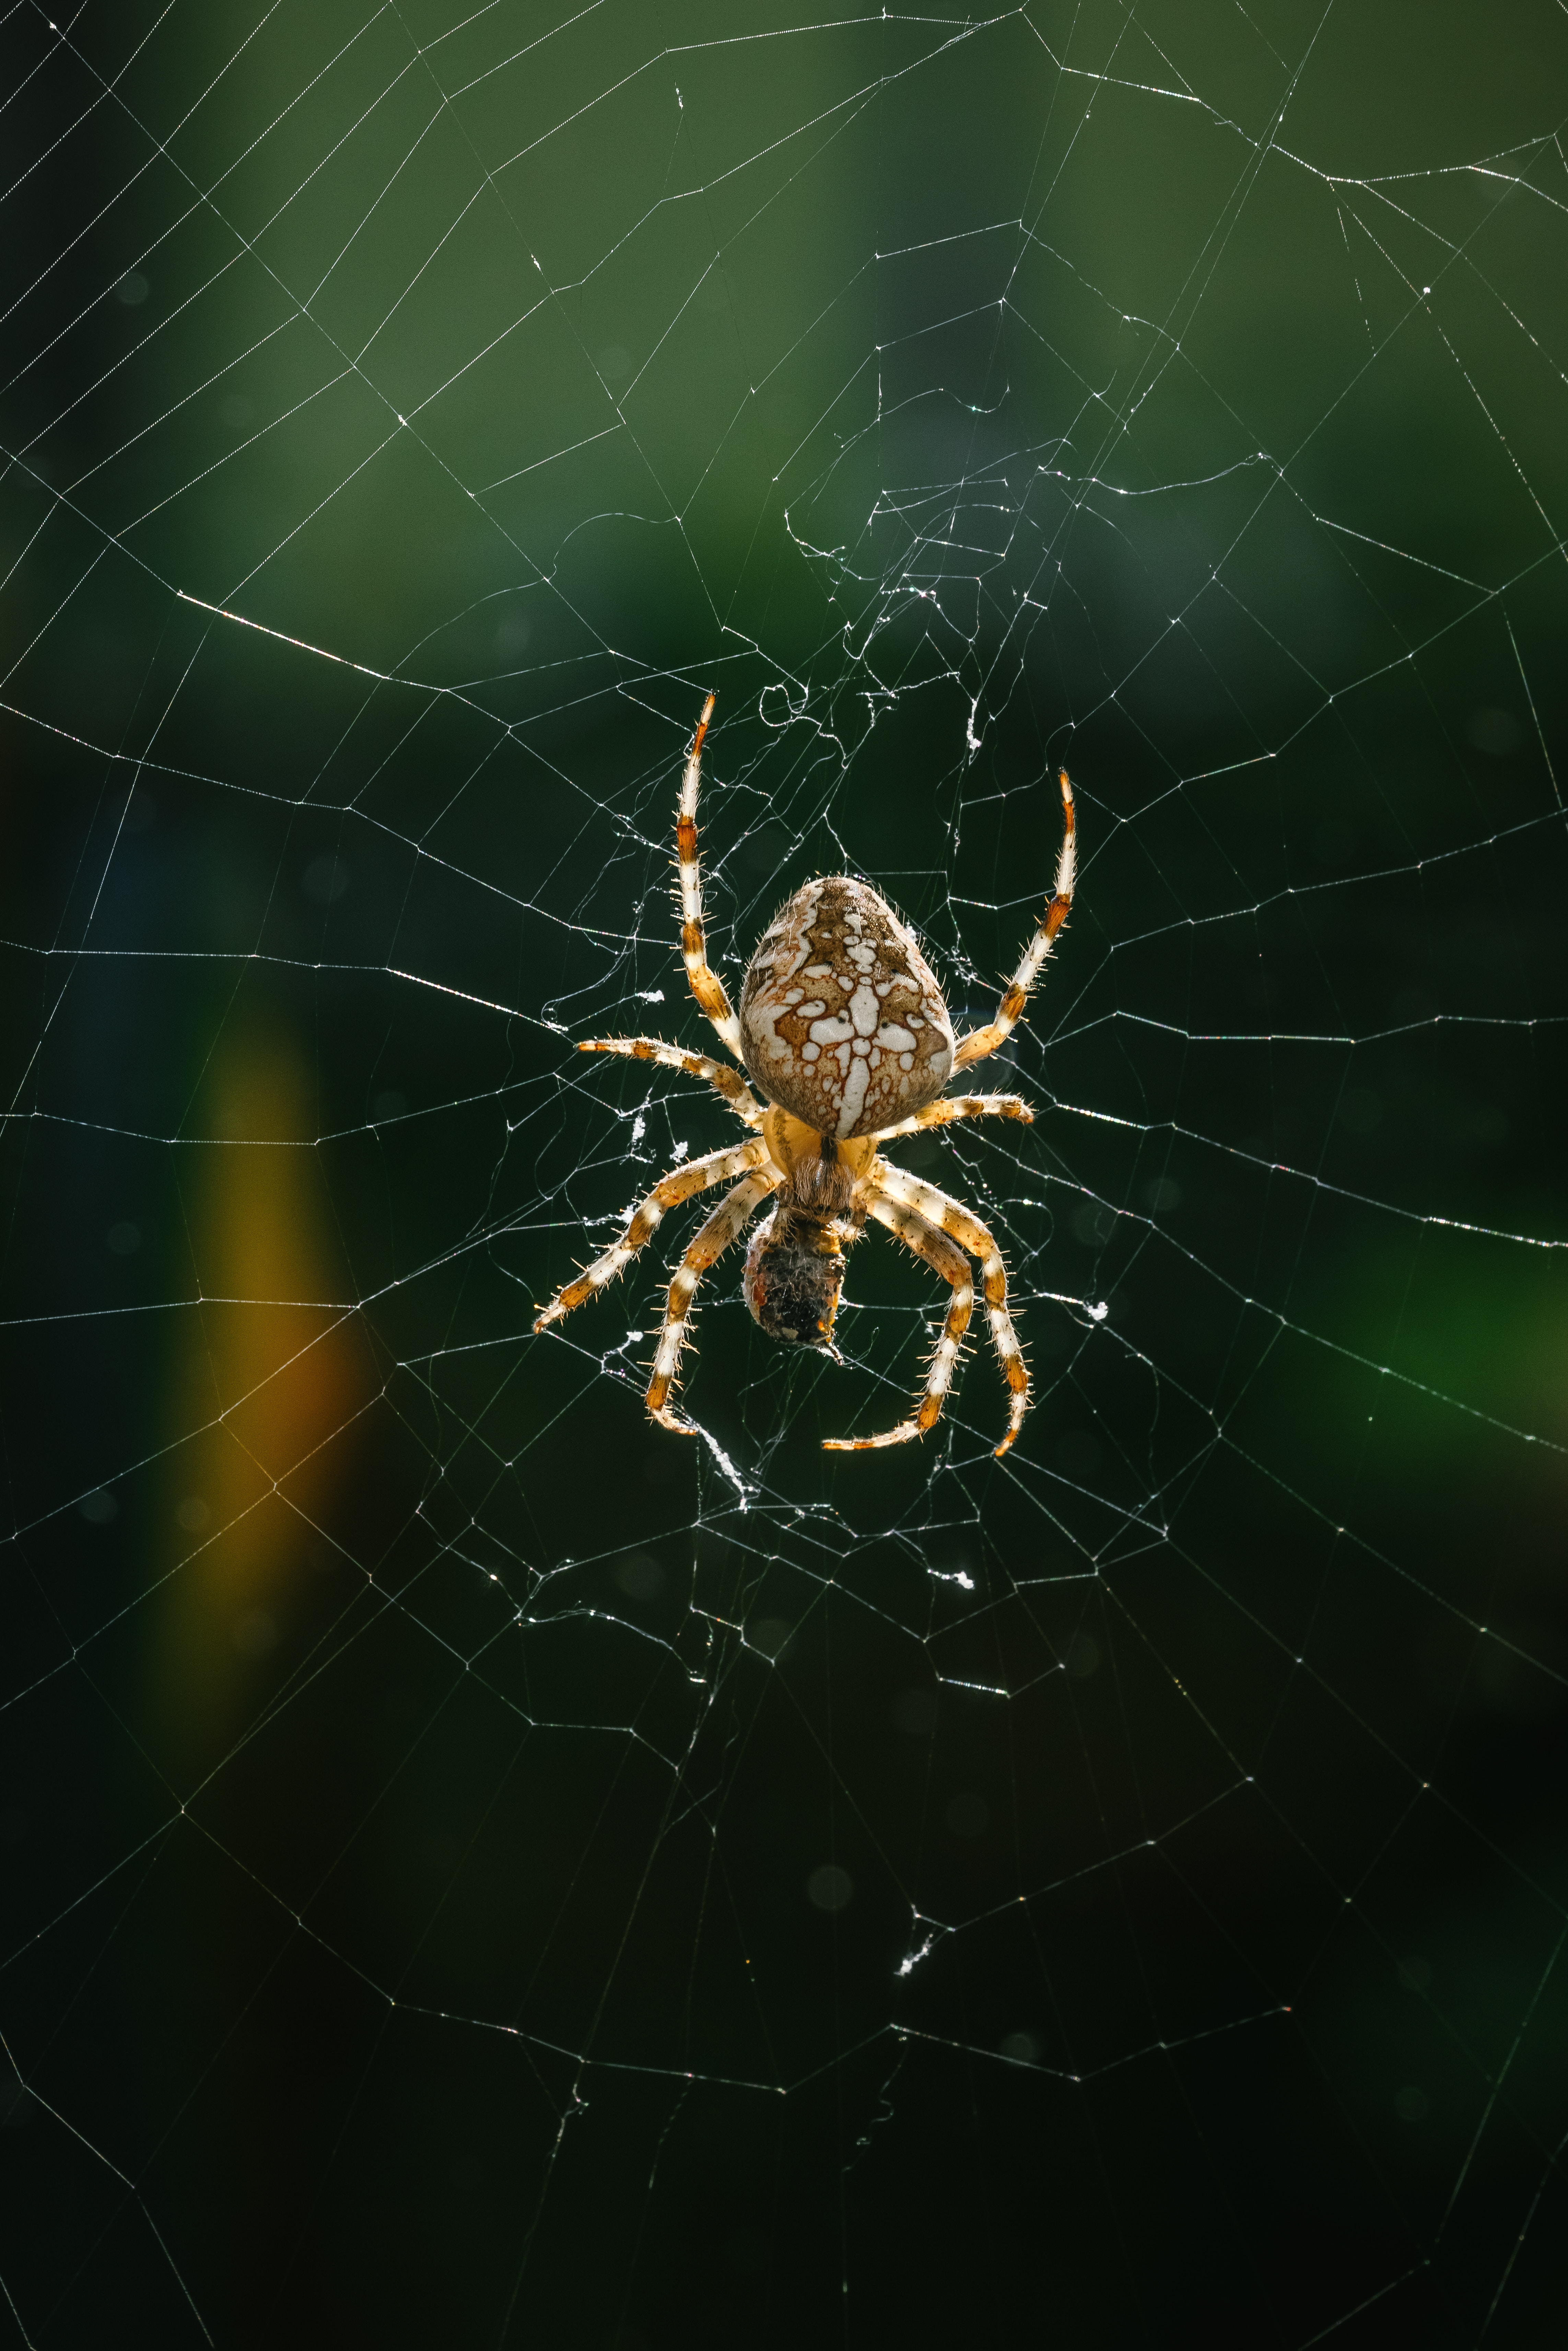 photograph of a spider in a web